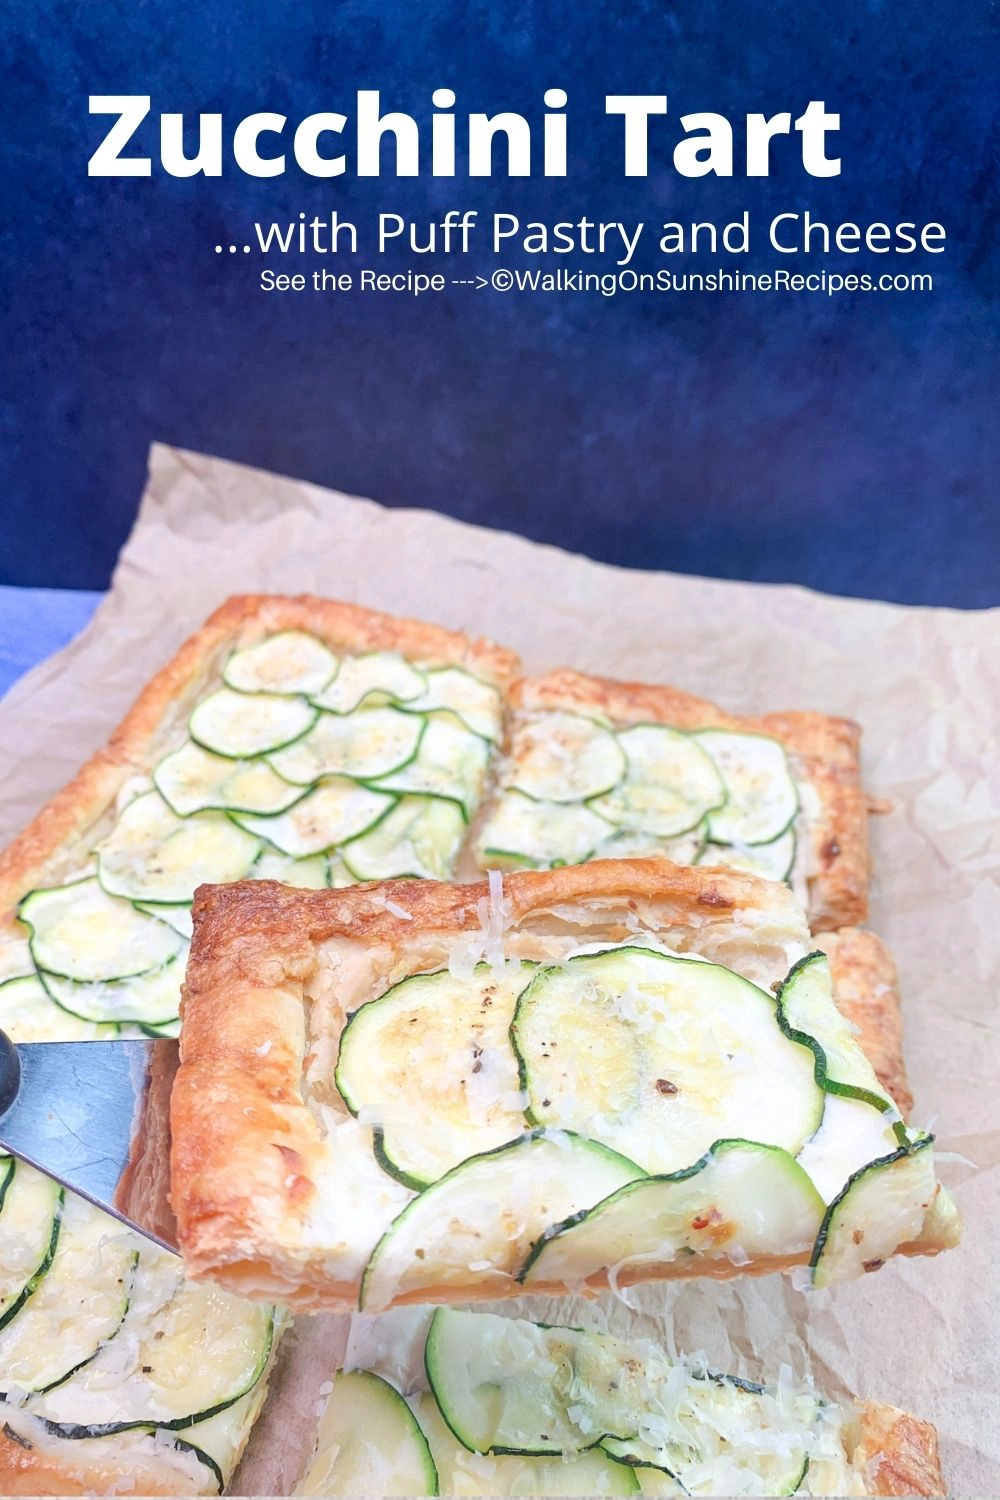 puff pastry with cream cheese filling recipe savory.